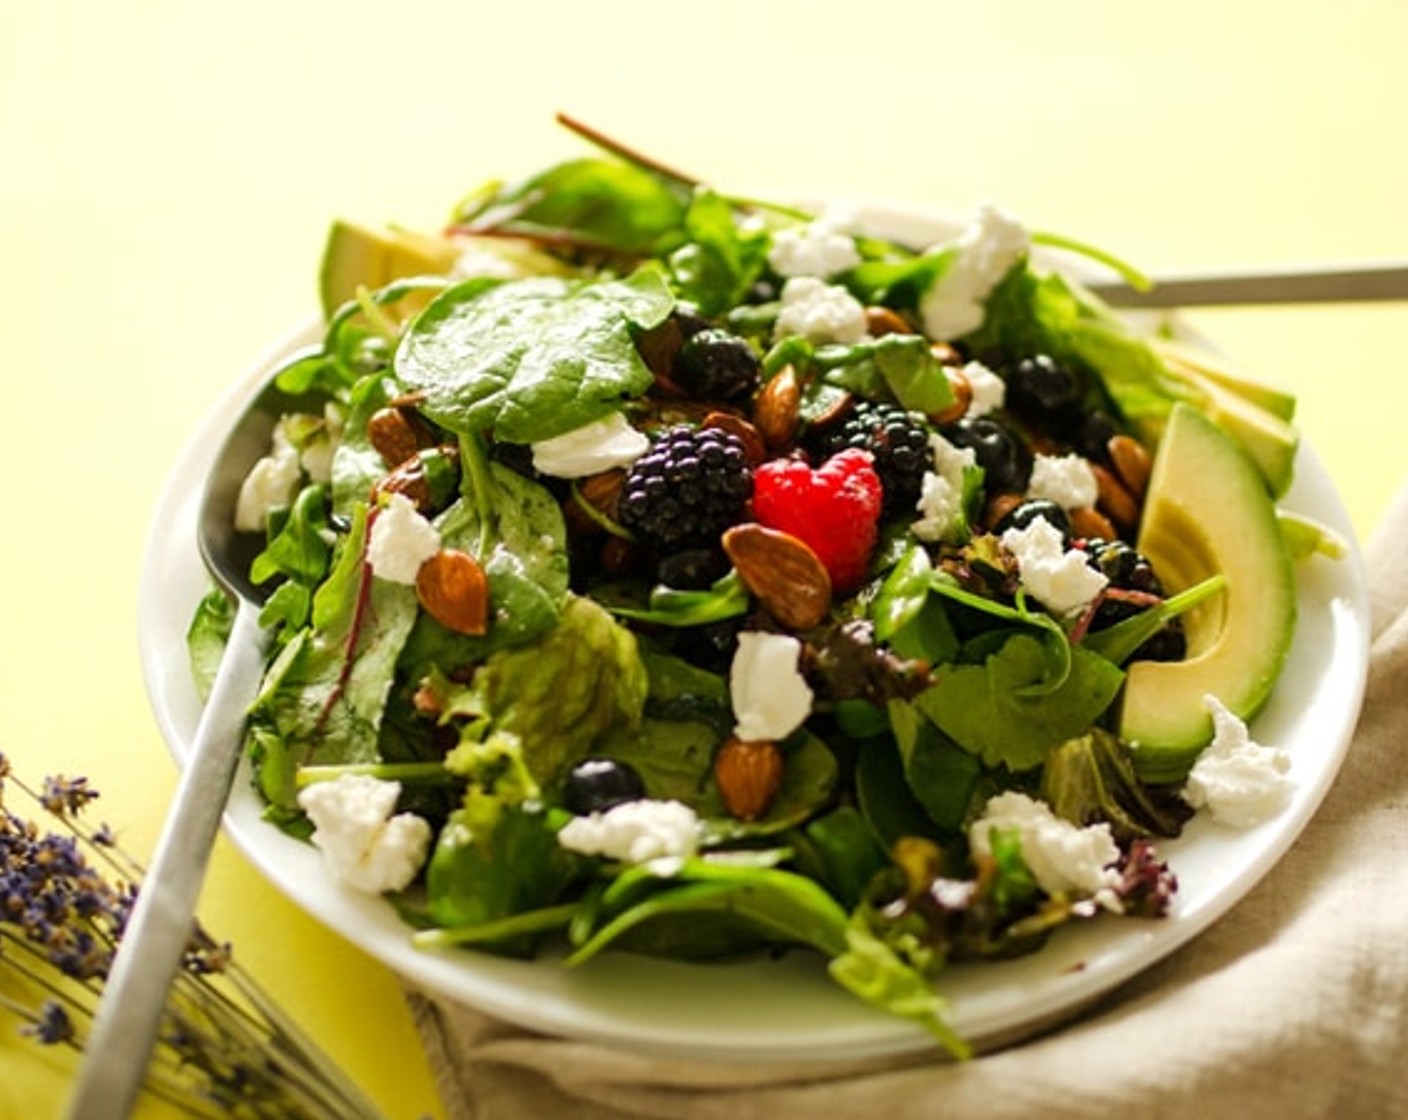 step 2 In a large bowl, gently toss together the Salad Greens (3 handfuls), Fresh Mixed Berries (1 cup), Almonds (1/2 cup), Goat Cheese (1/4 cup), and vinaigrette. Top with Avocado (1/2). Serve and enjoy!